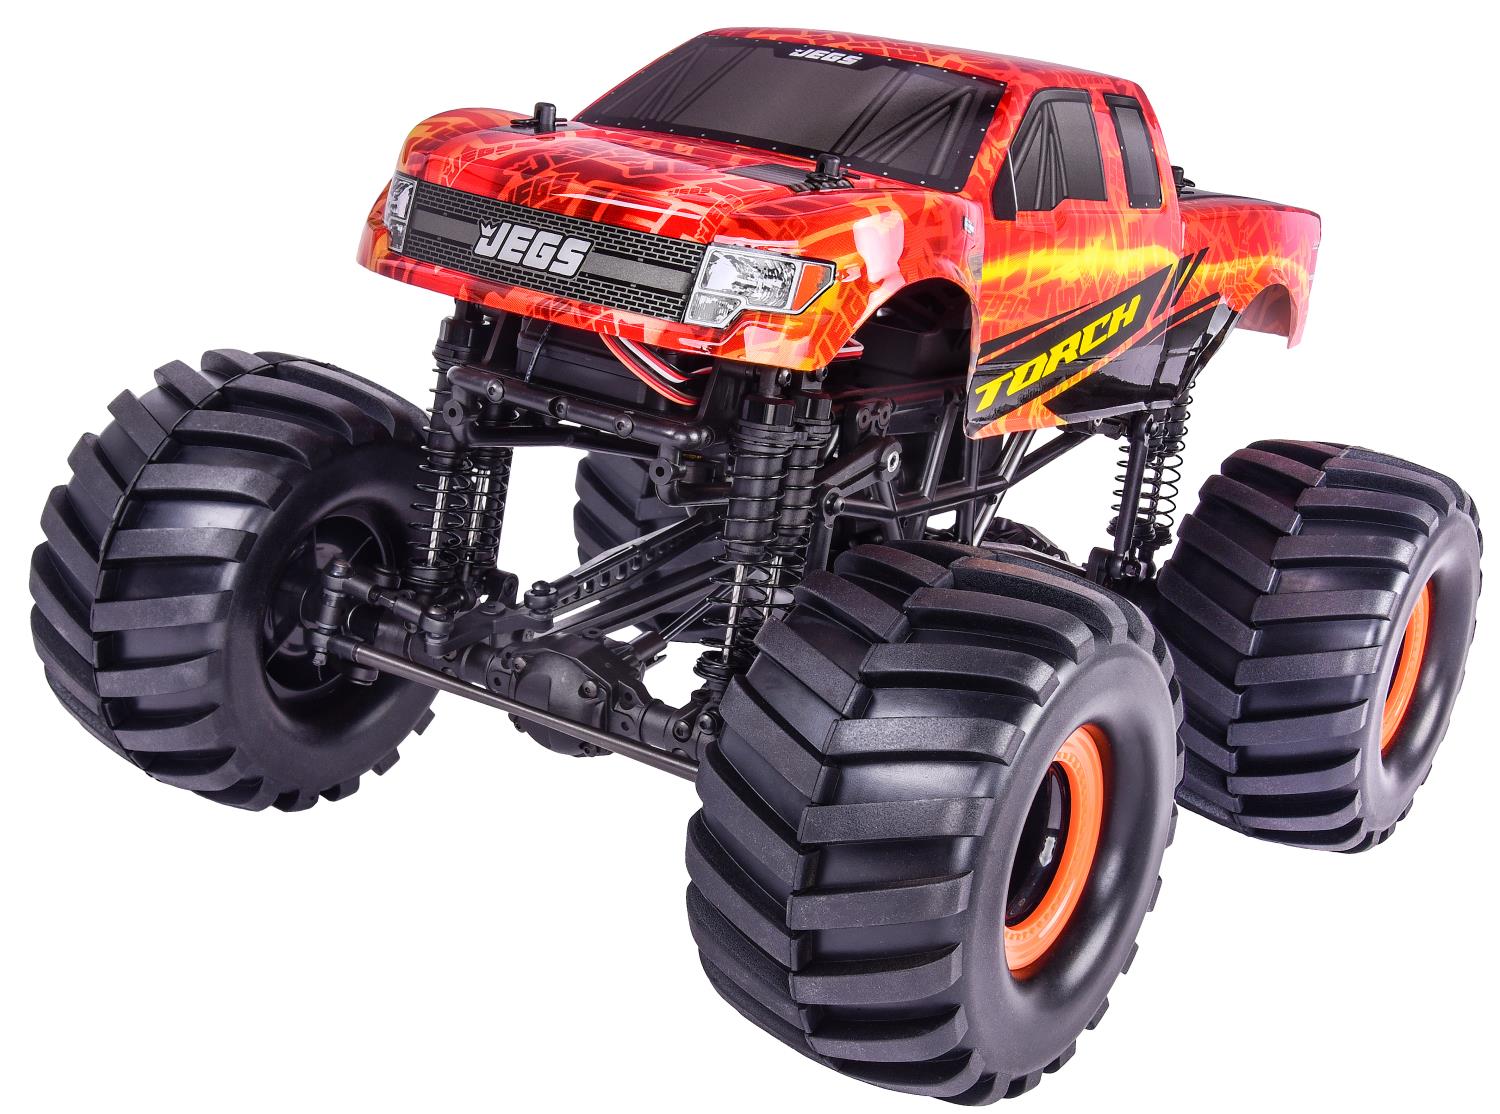 Torch RC Monster Truck [4WD Solid Axle]